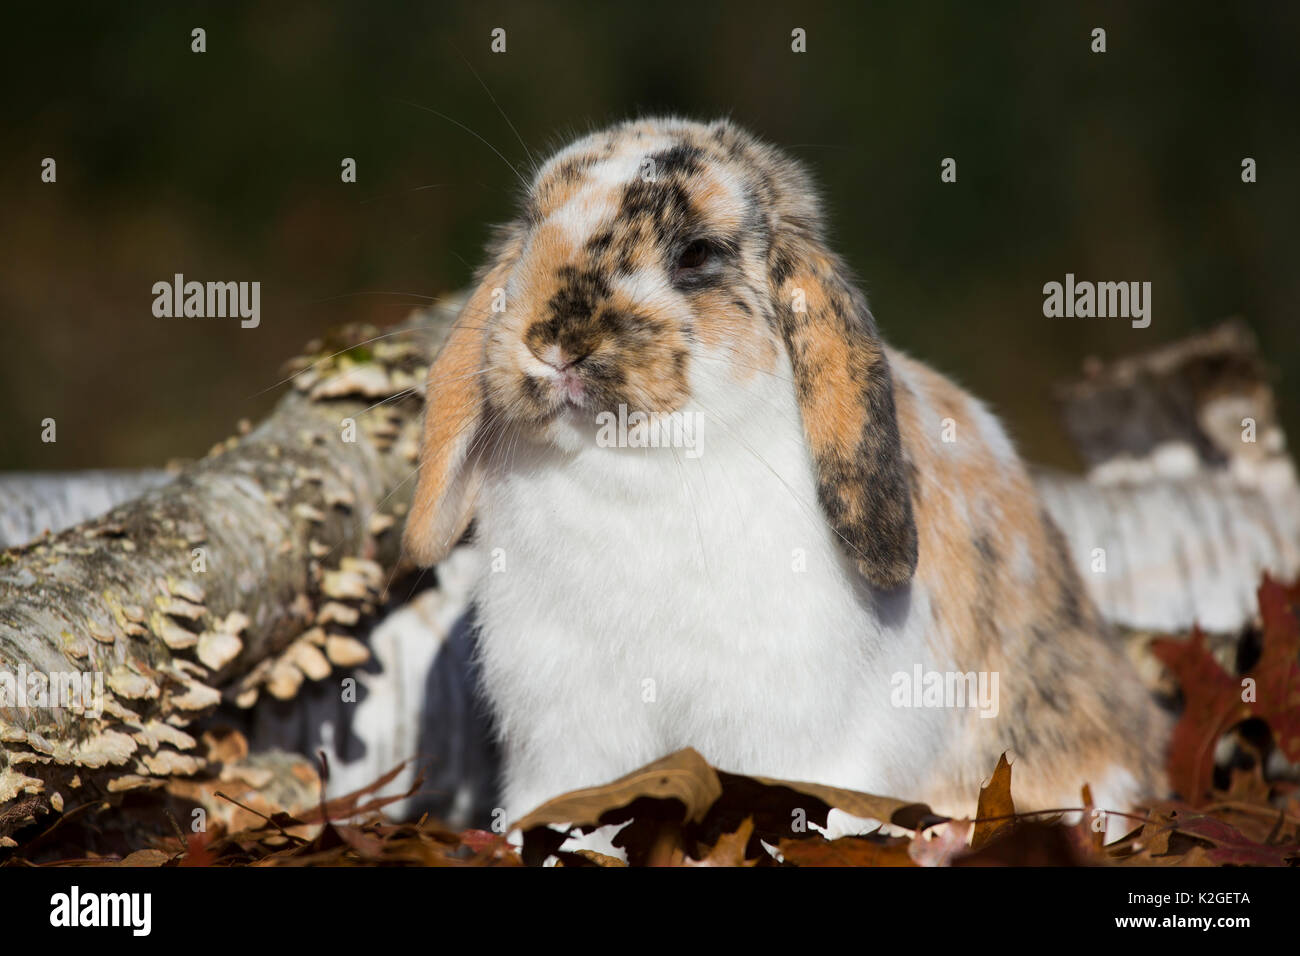 Holland Lop rabbit in oak leaves with Paper Birch log, Newington, Connecticut, USA Stock Photo